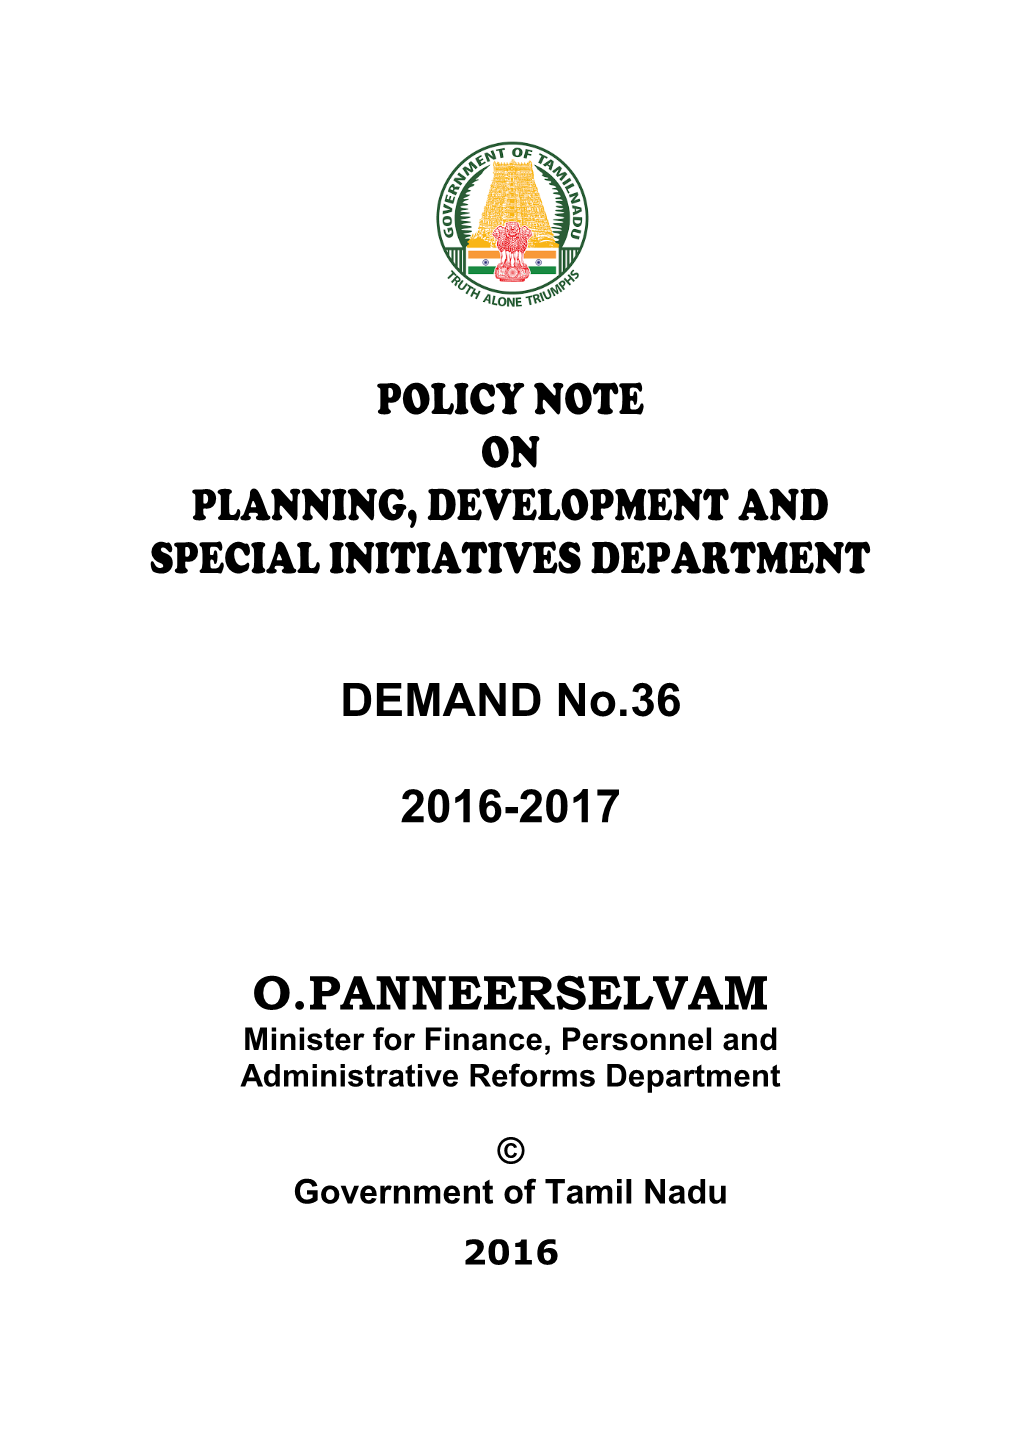 POLICY NOTE on PLANNING, DEVELOPMENT and SPECIAL INITIATIVES DEPARTMENT DEMAND No.36 2016-2017